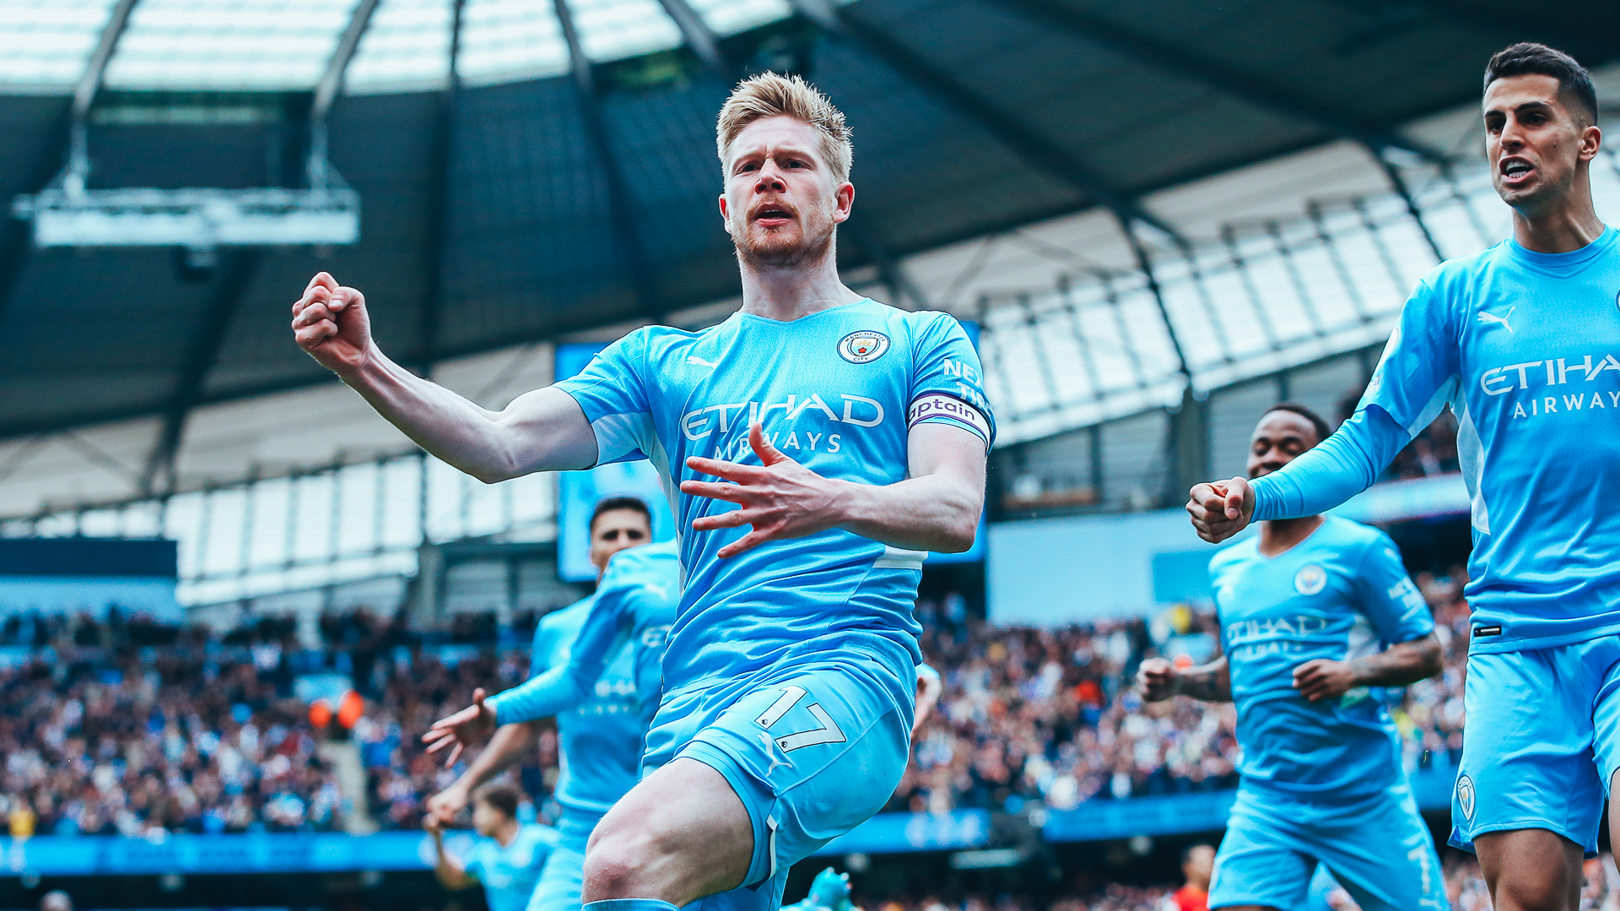 'Title race will go to the wire' says De Bruyne